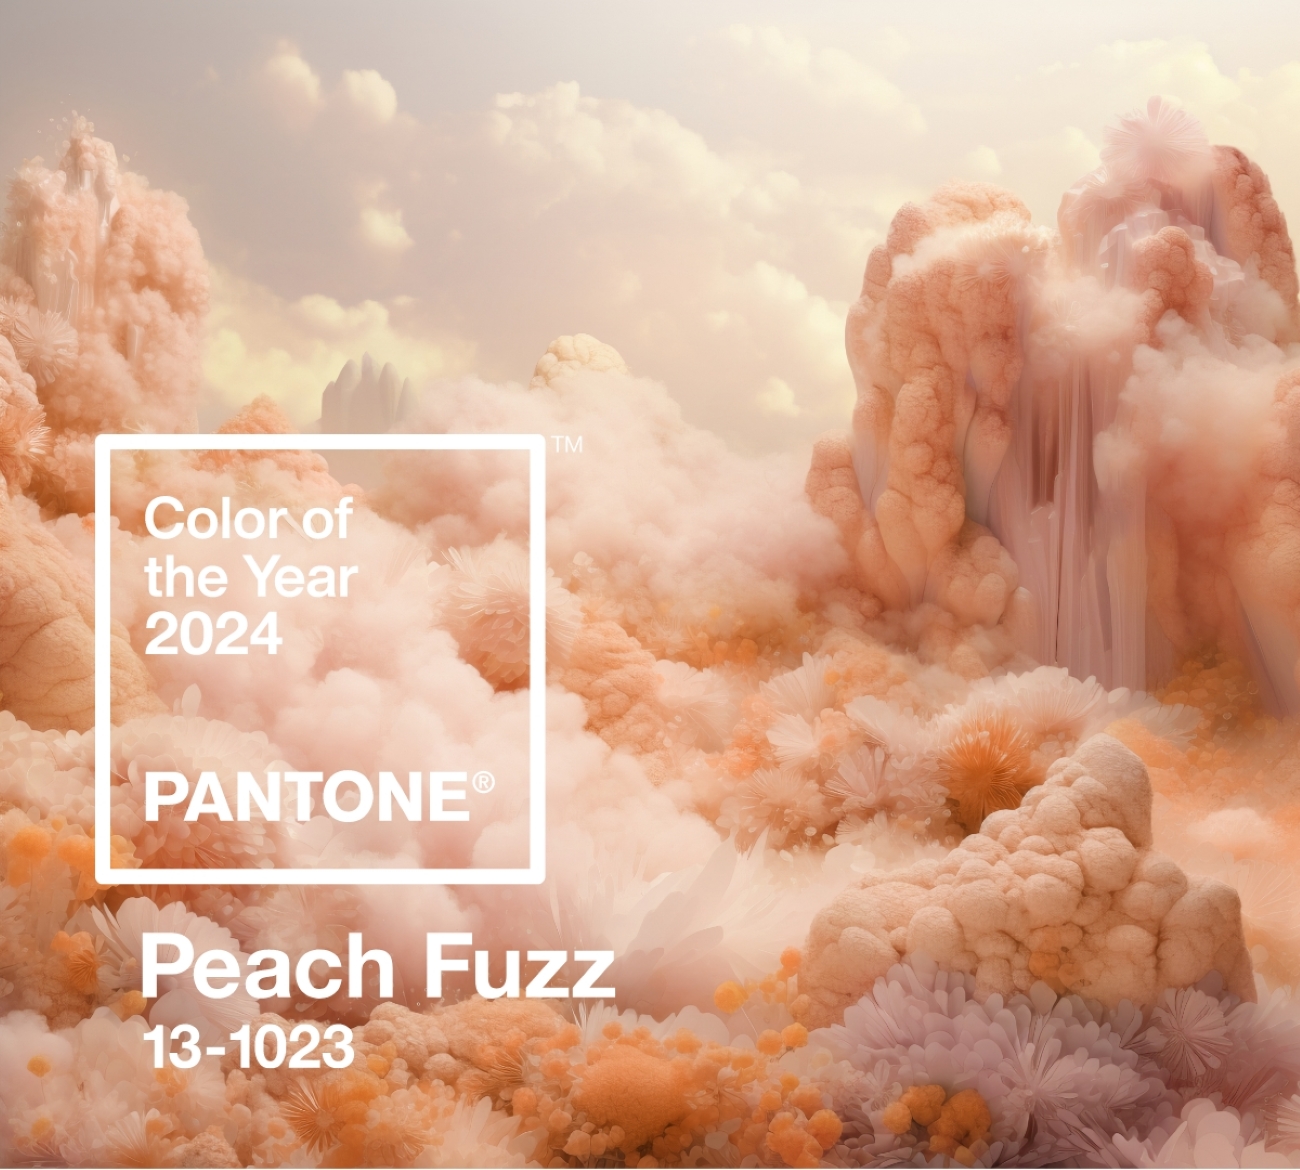 Pantone's Color of the Year Peach Fuzz Perennials and Sutherland